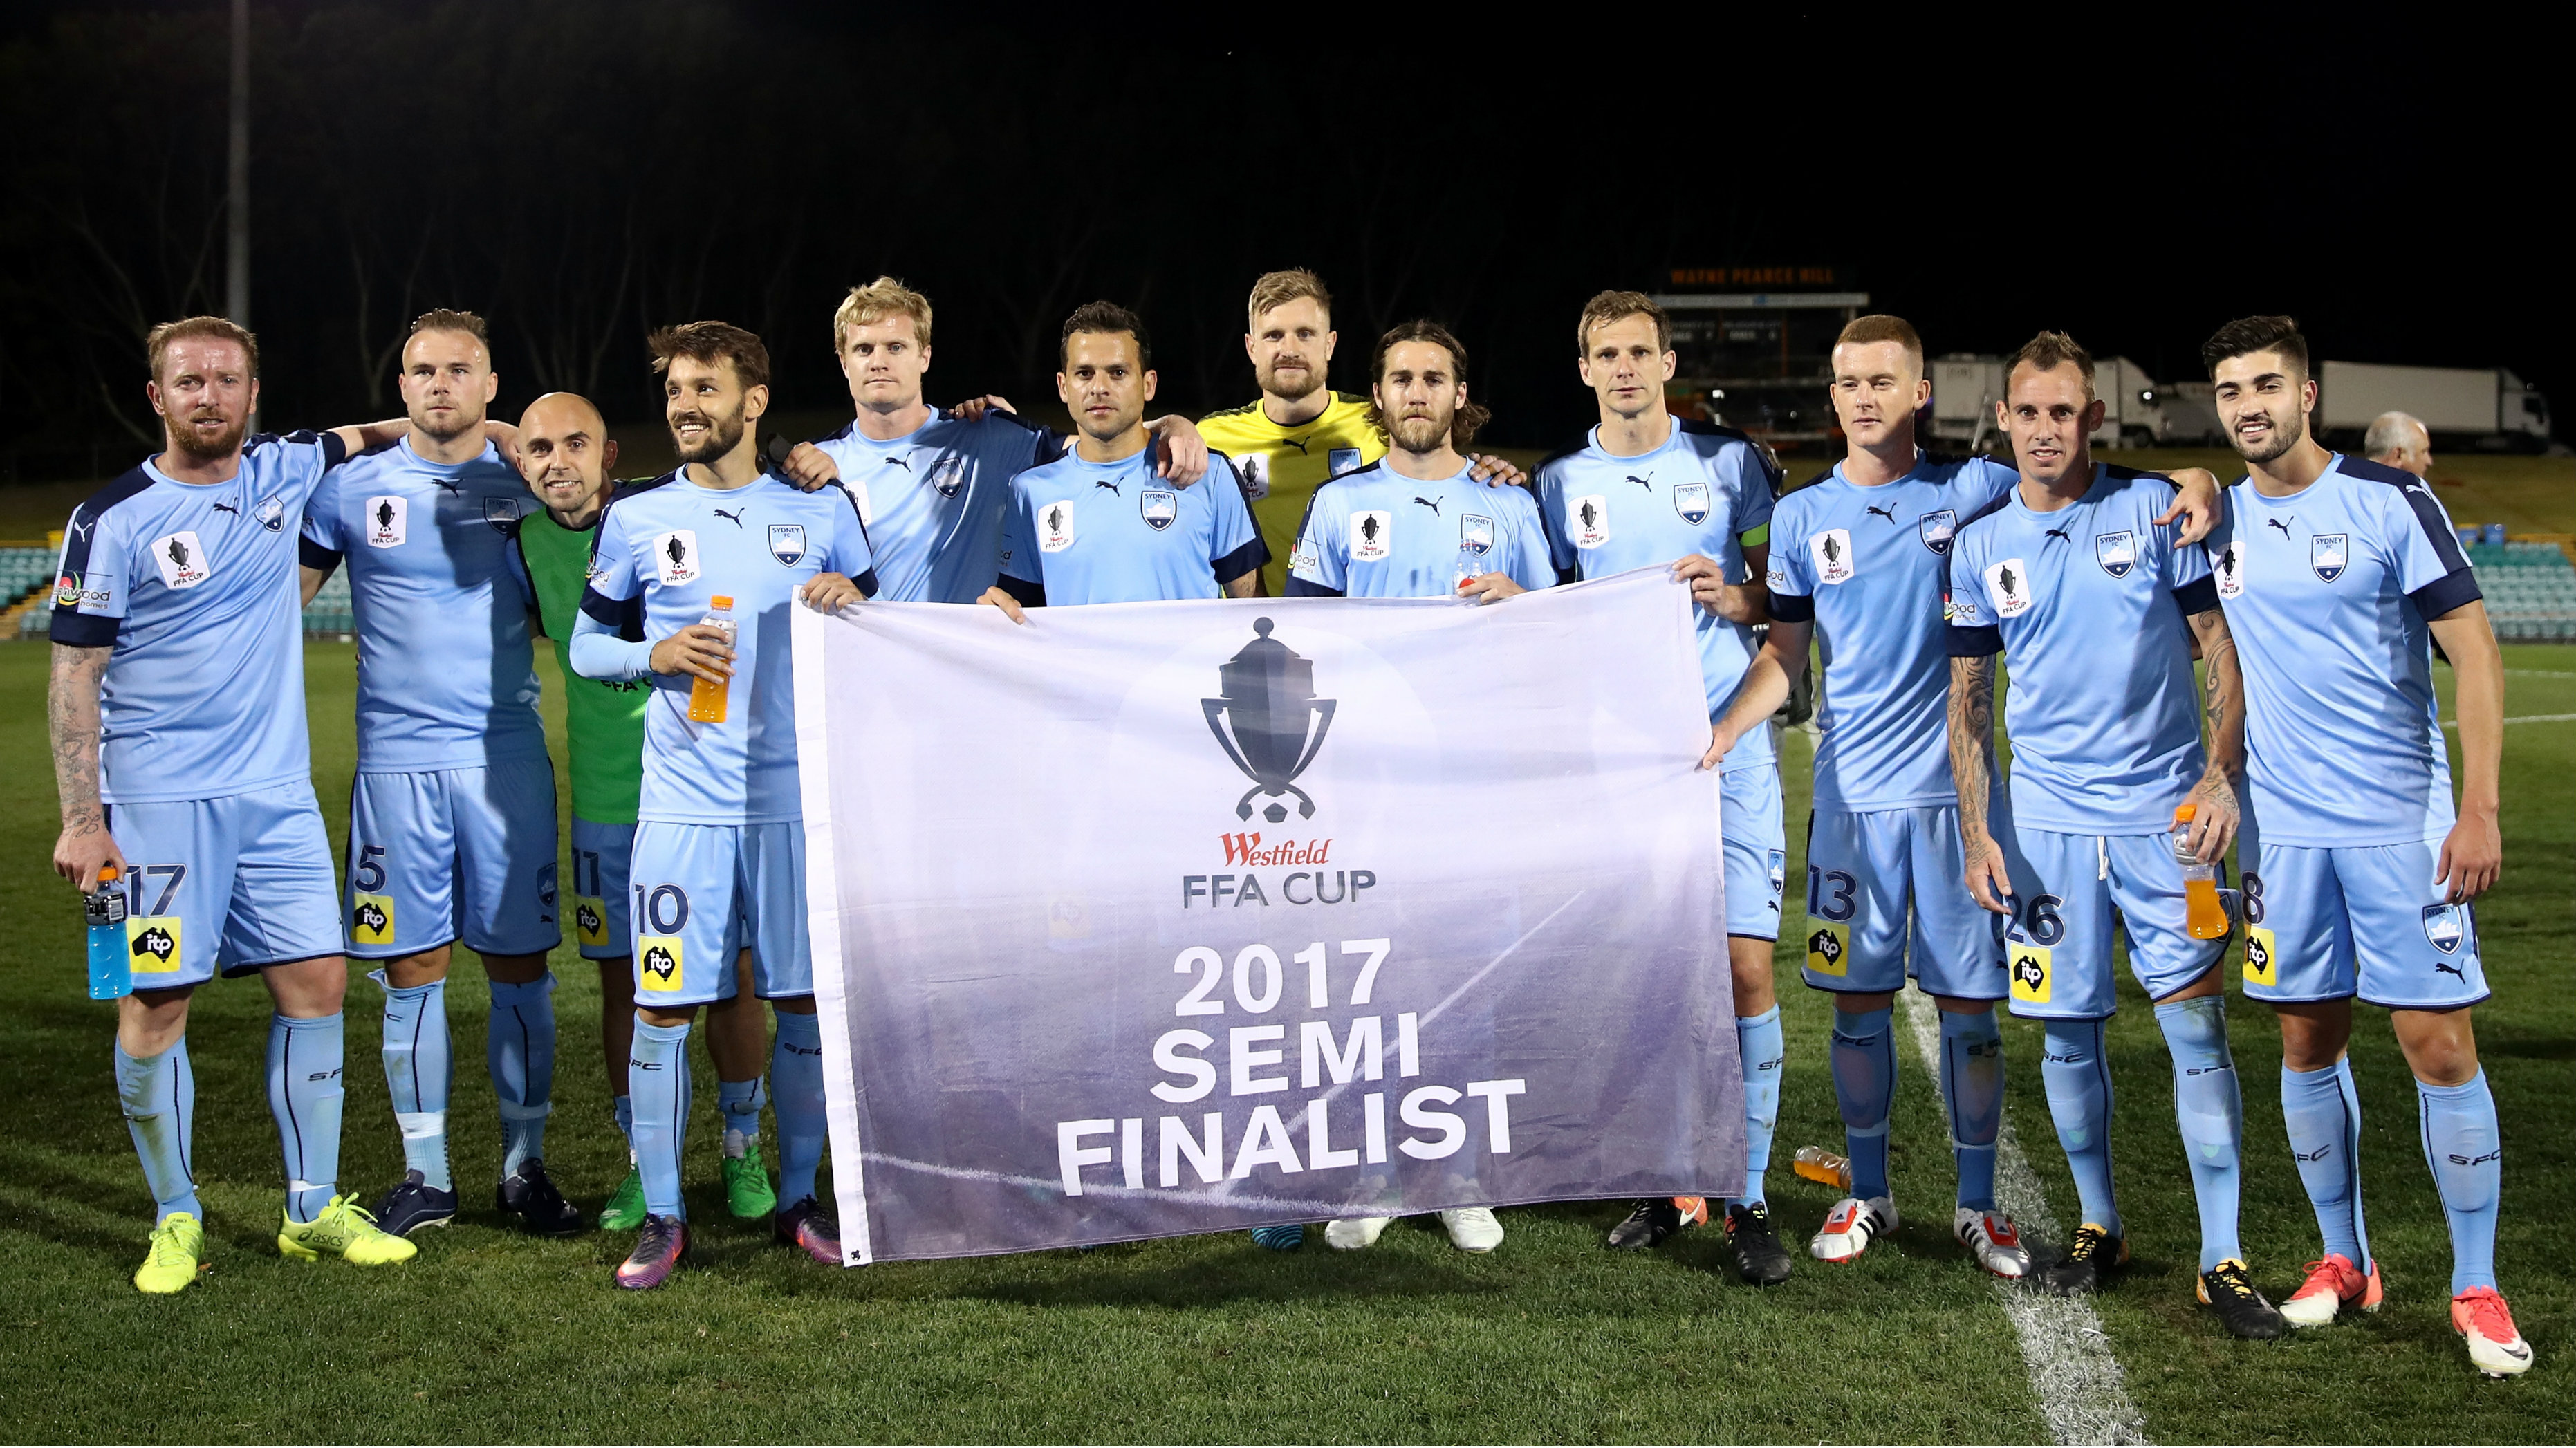 Sydney FC cruised into the FFA Cup Semi Finals with a 2-0 win over Melbourne City.